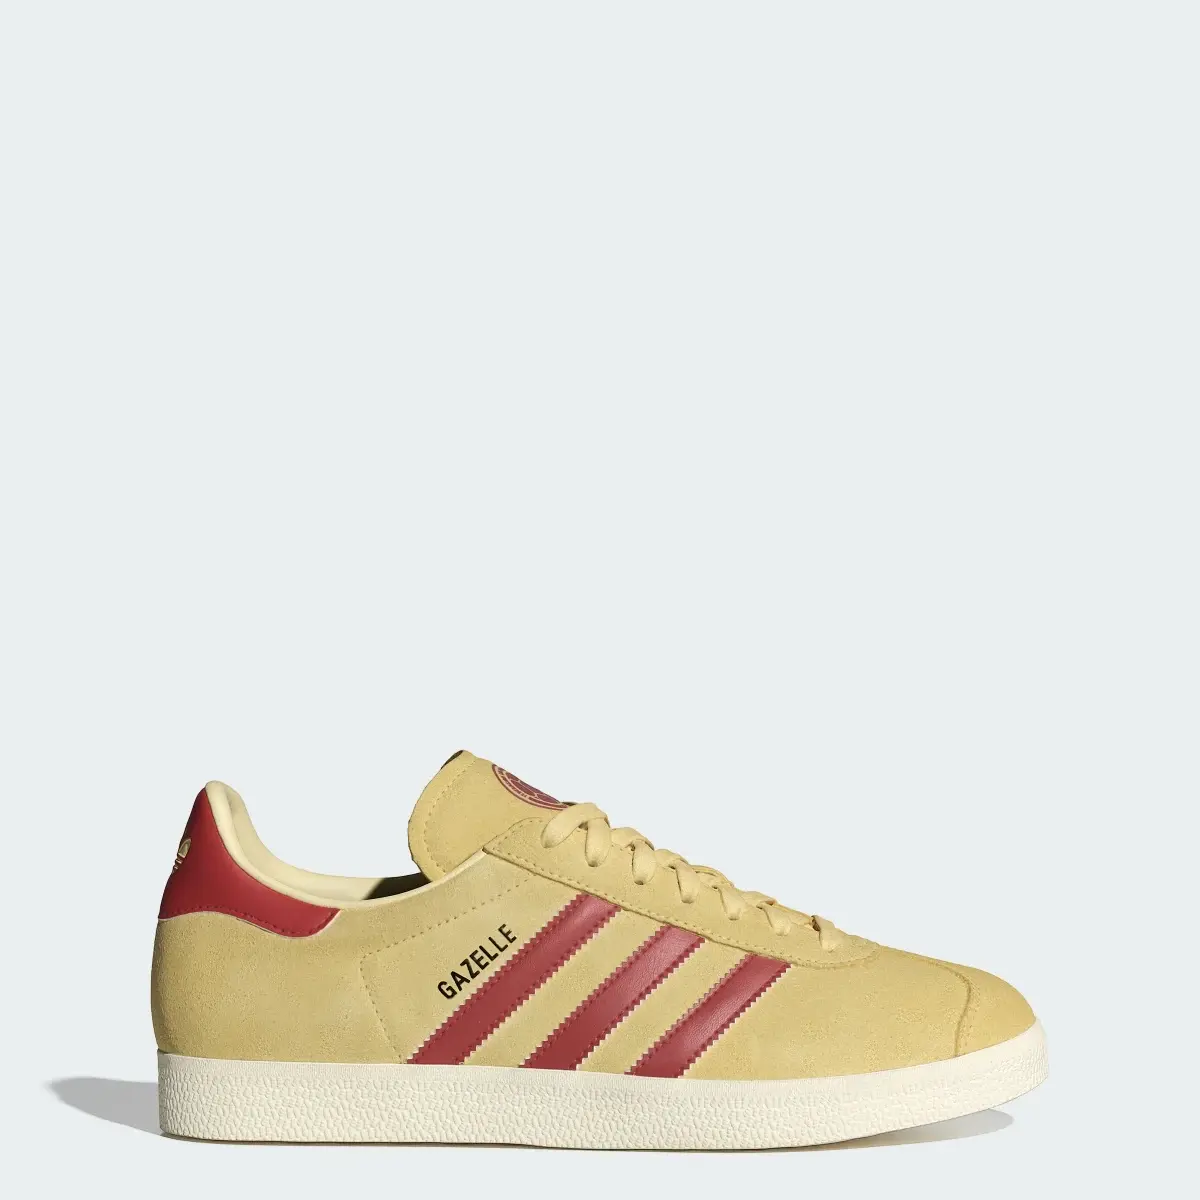 Adidas Gazelle Colombia Shoes. 1